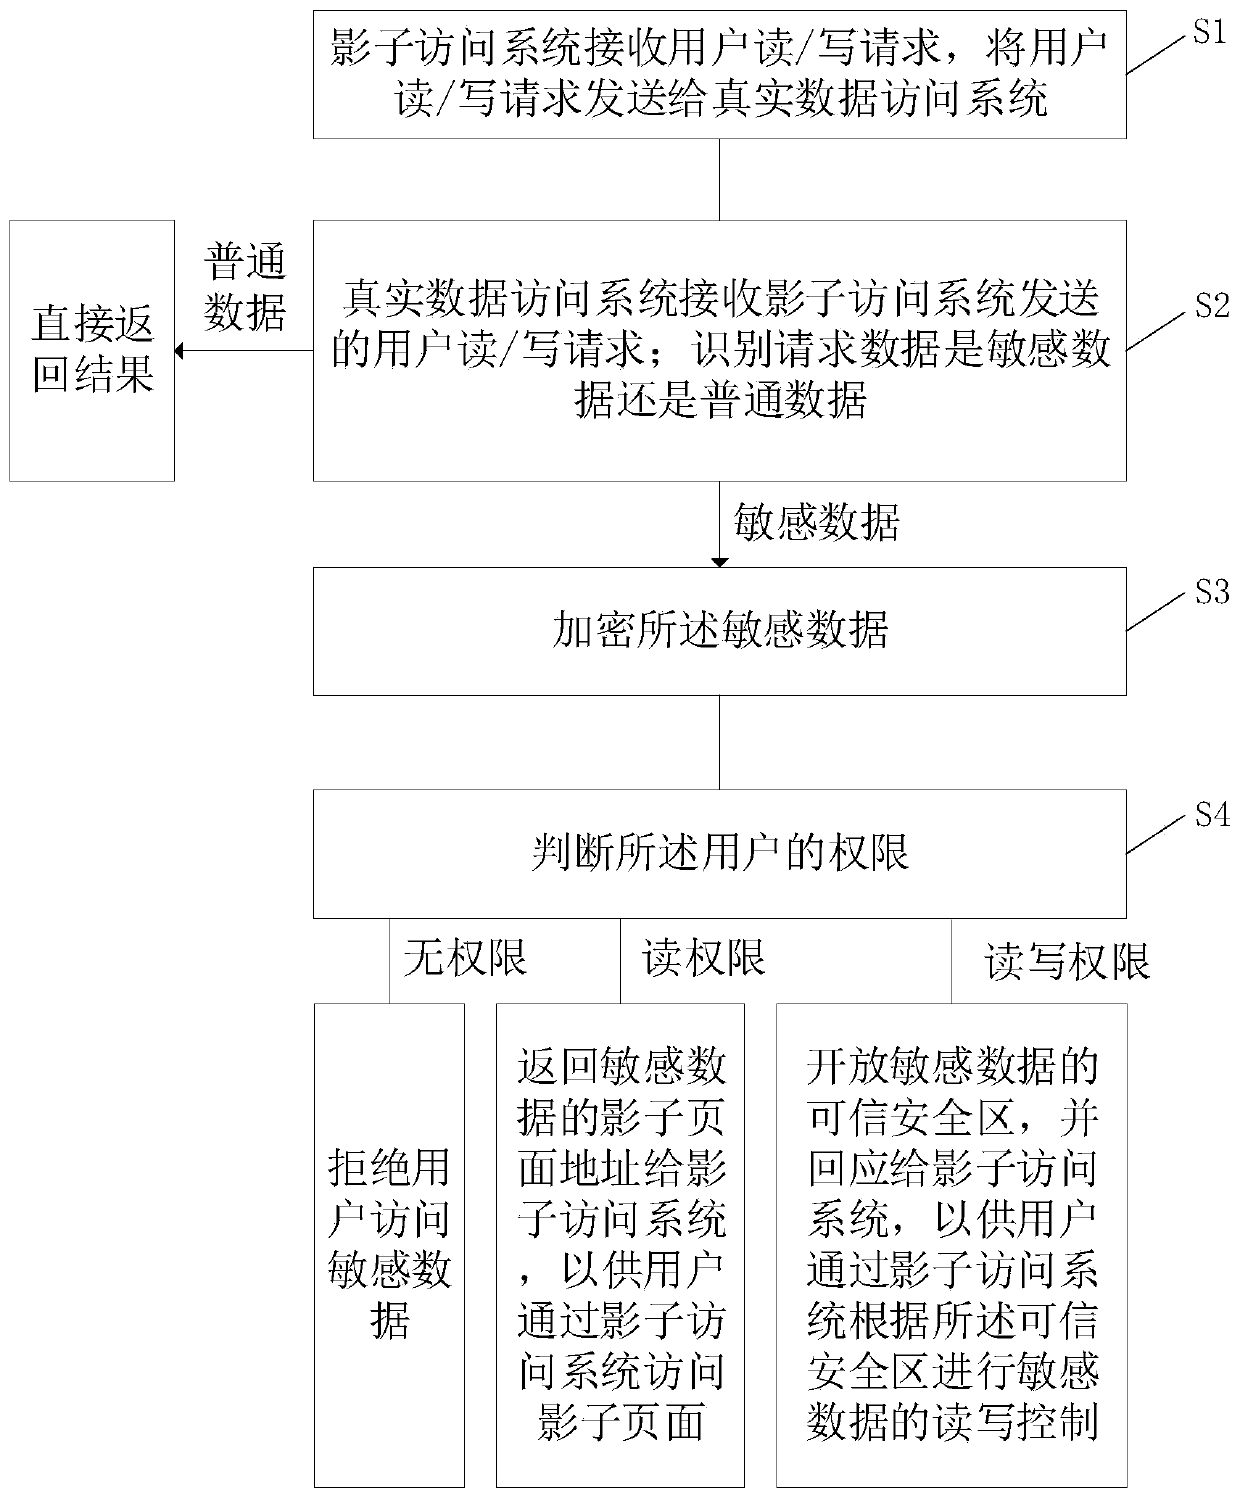 Sensitive data security protection method and system based on shadow system